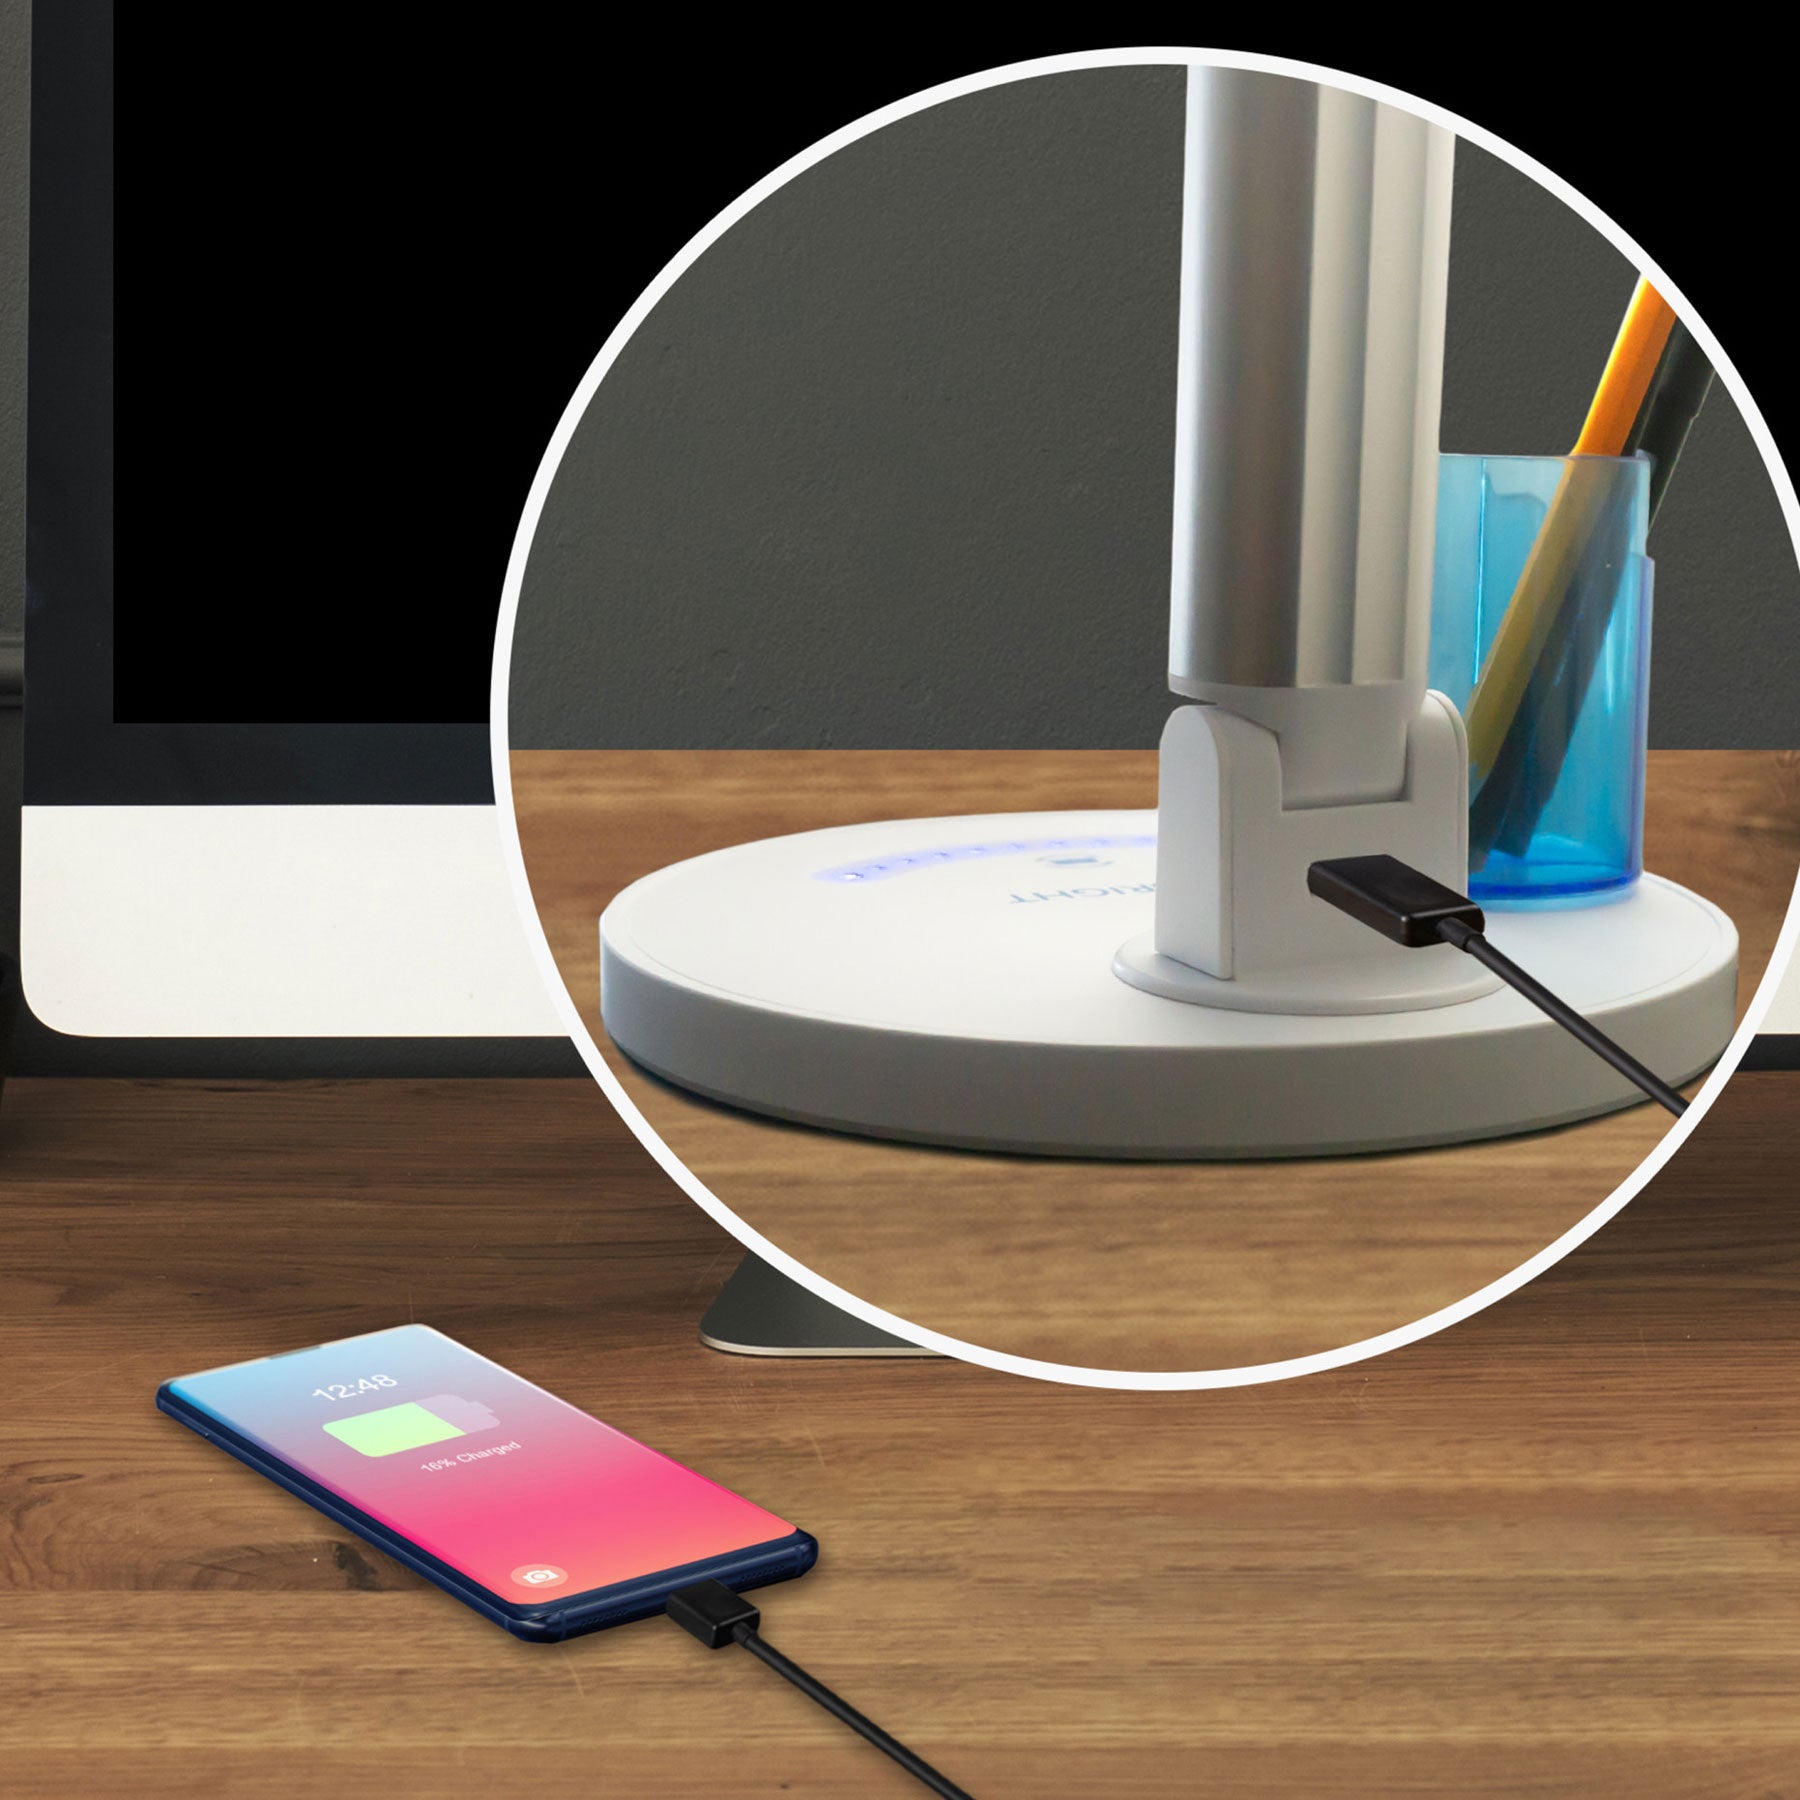 Modern LED Desk Lamp with Touch Controls & USB Charge Port by Viribright